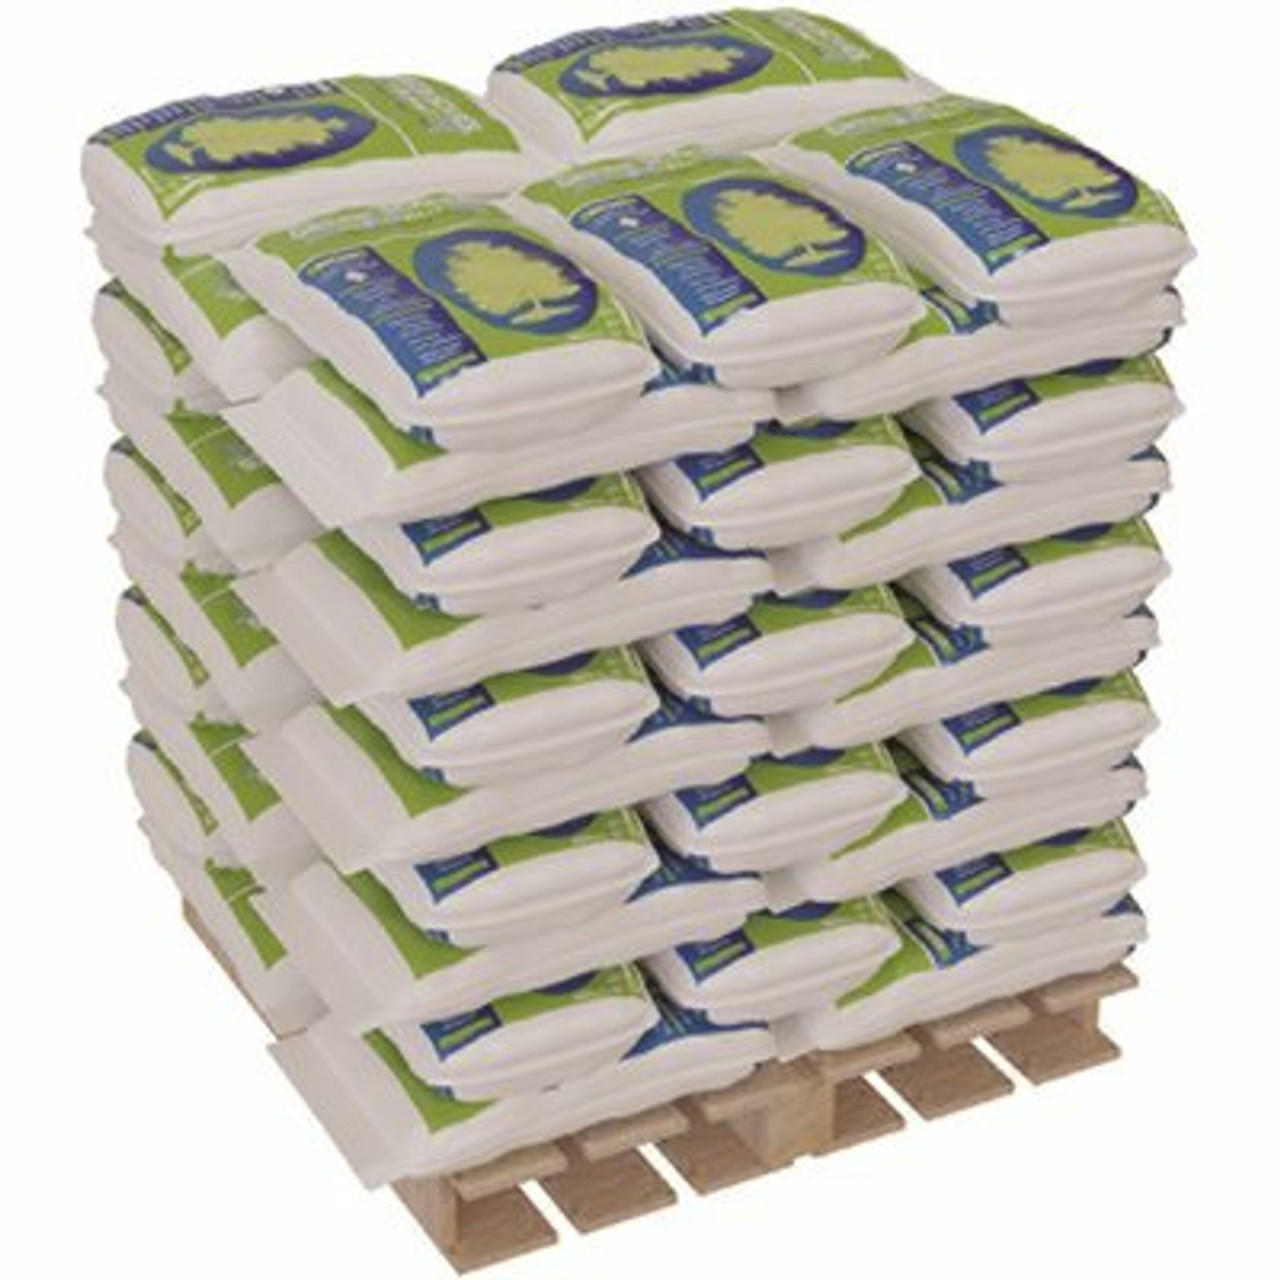 Green Scapes 50 Lbs. Eco-Friendly Ice Melt Bag (1-Pallet)